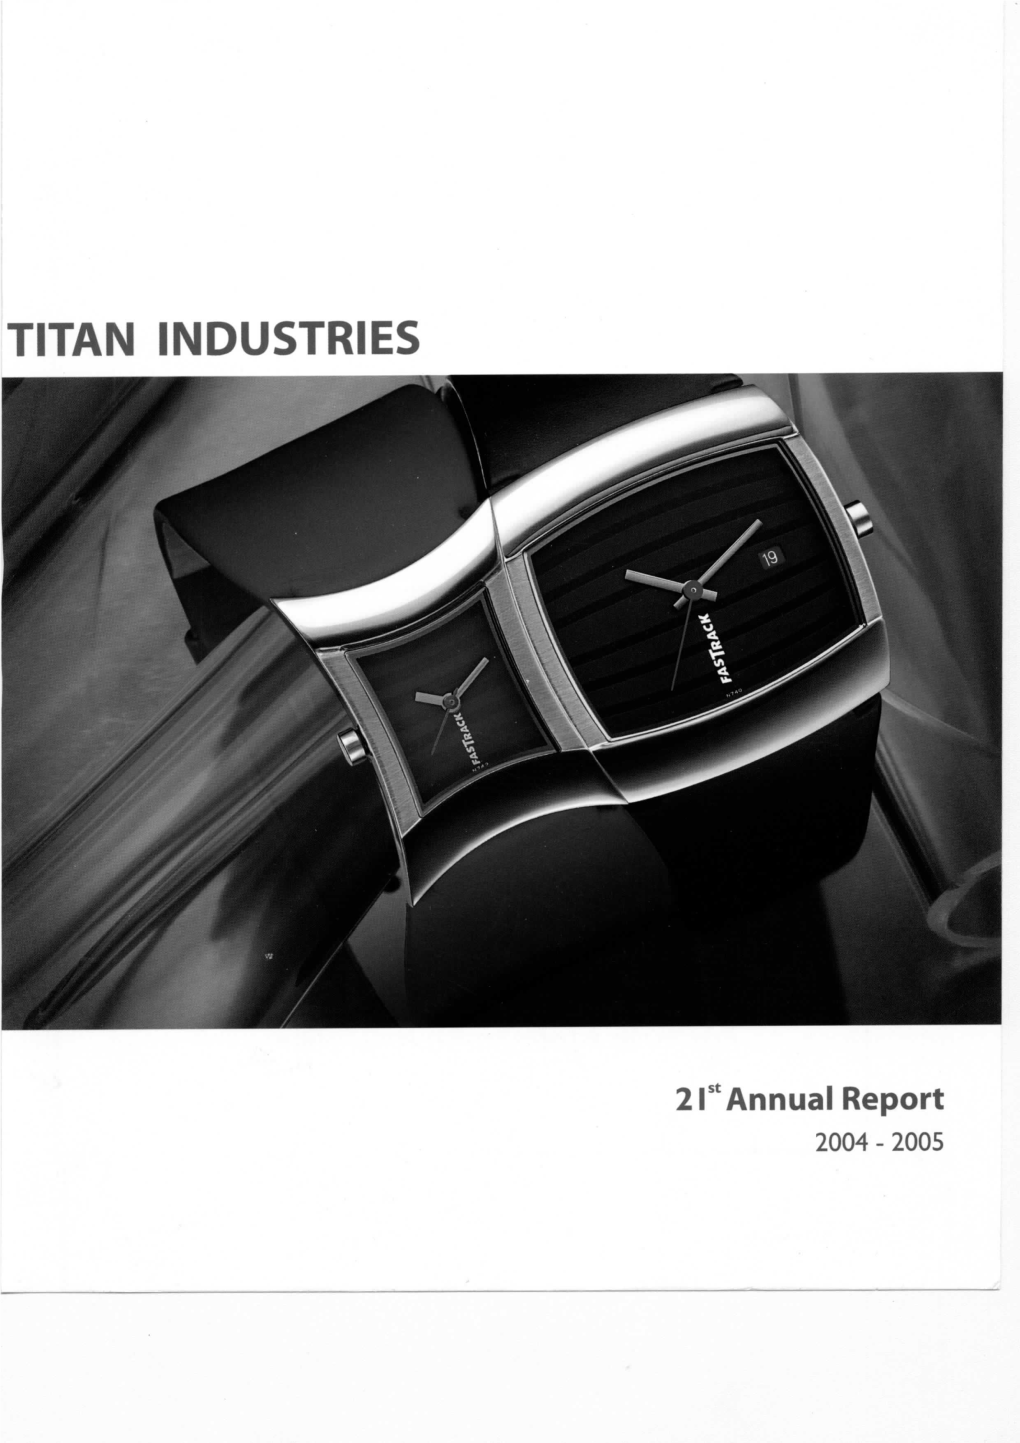 Annual Report 2004 - 2005 to Be Innovative, World Class, Contemporary and Build India's Most Desirable Brands